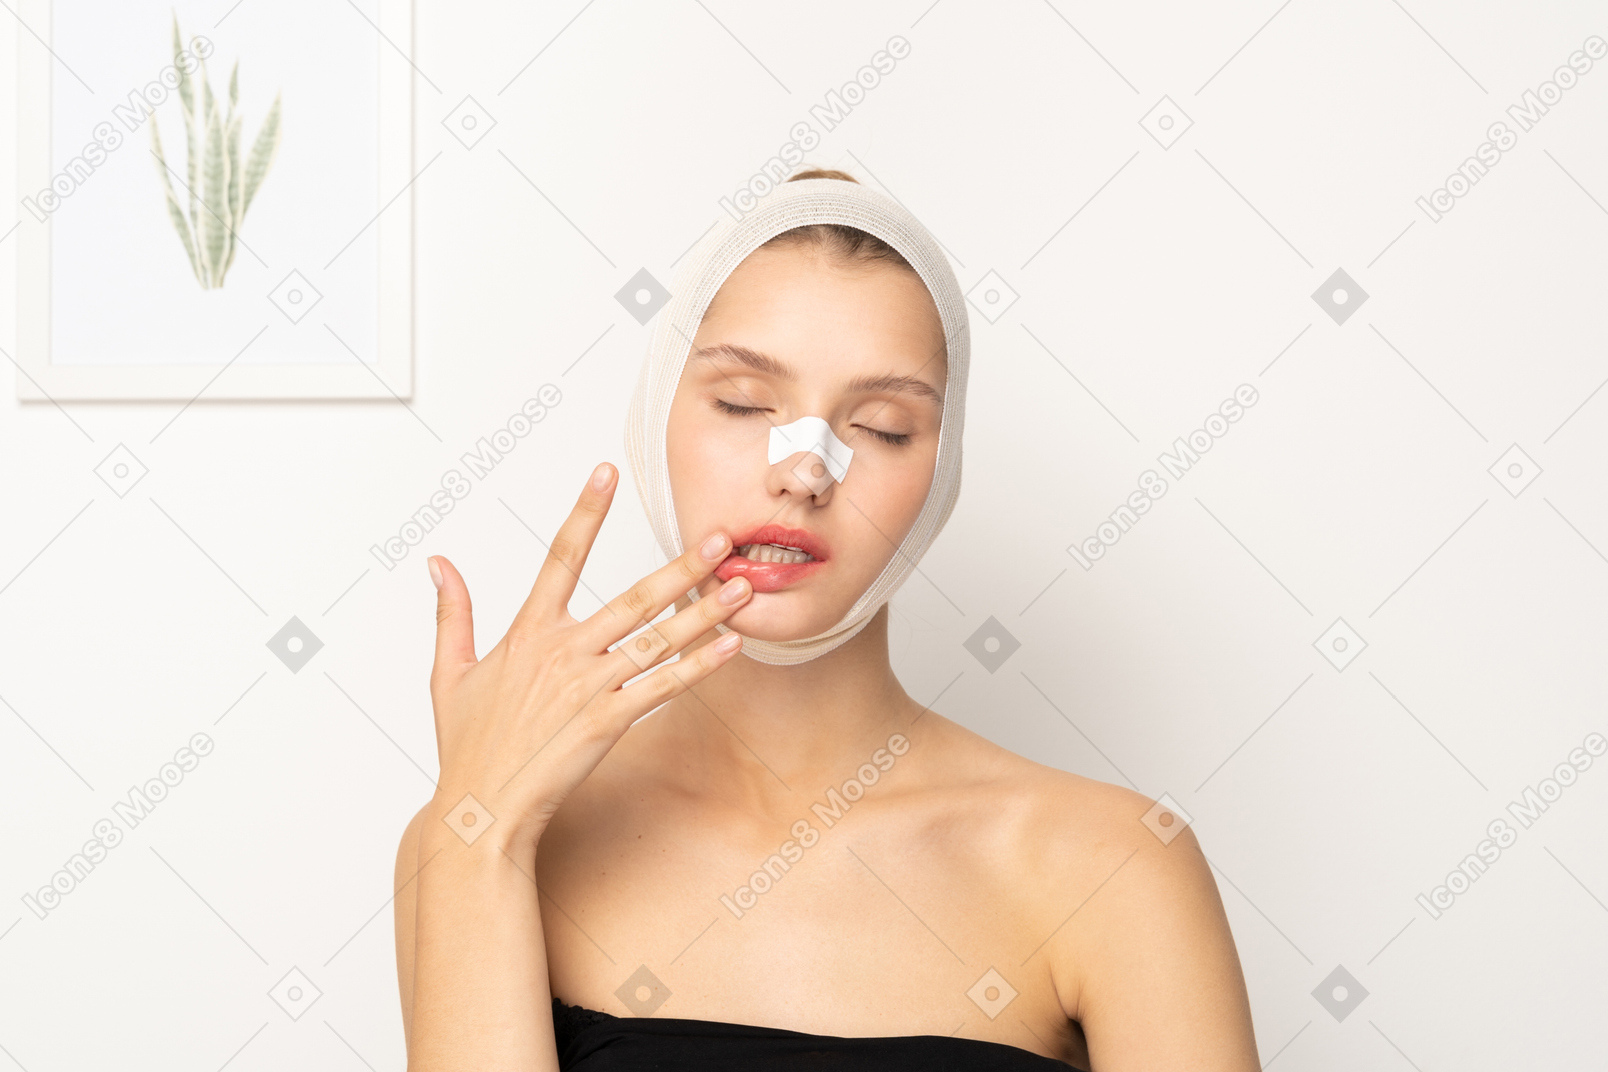 Young woman with bandaged head touching her lips